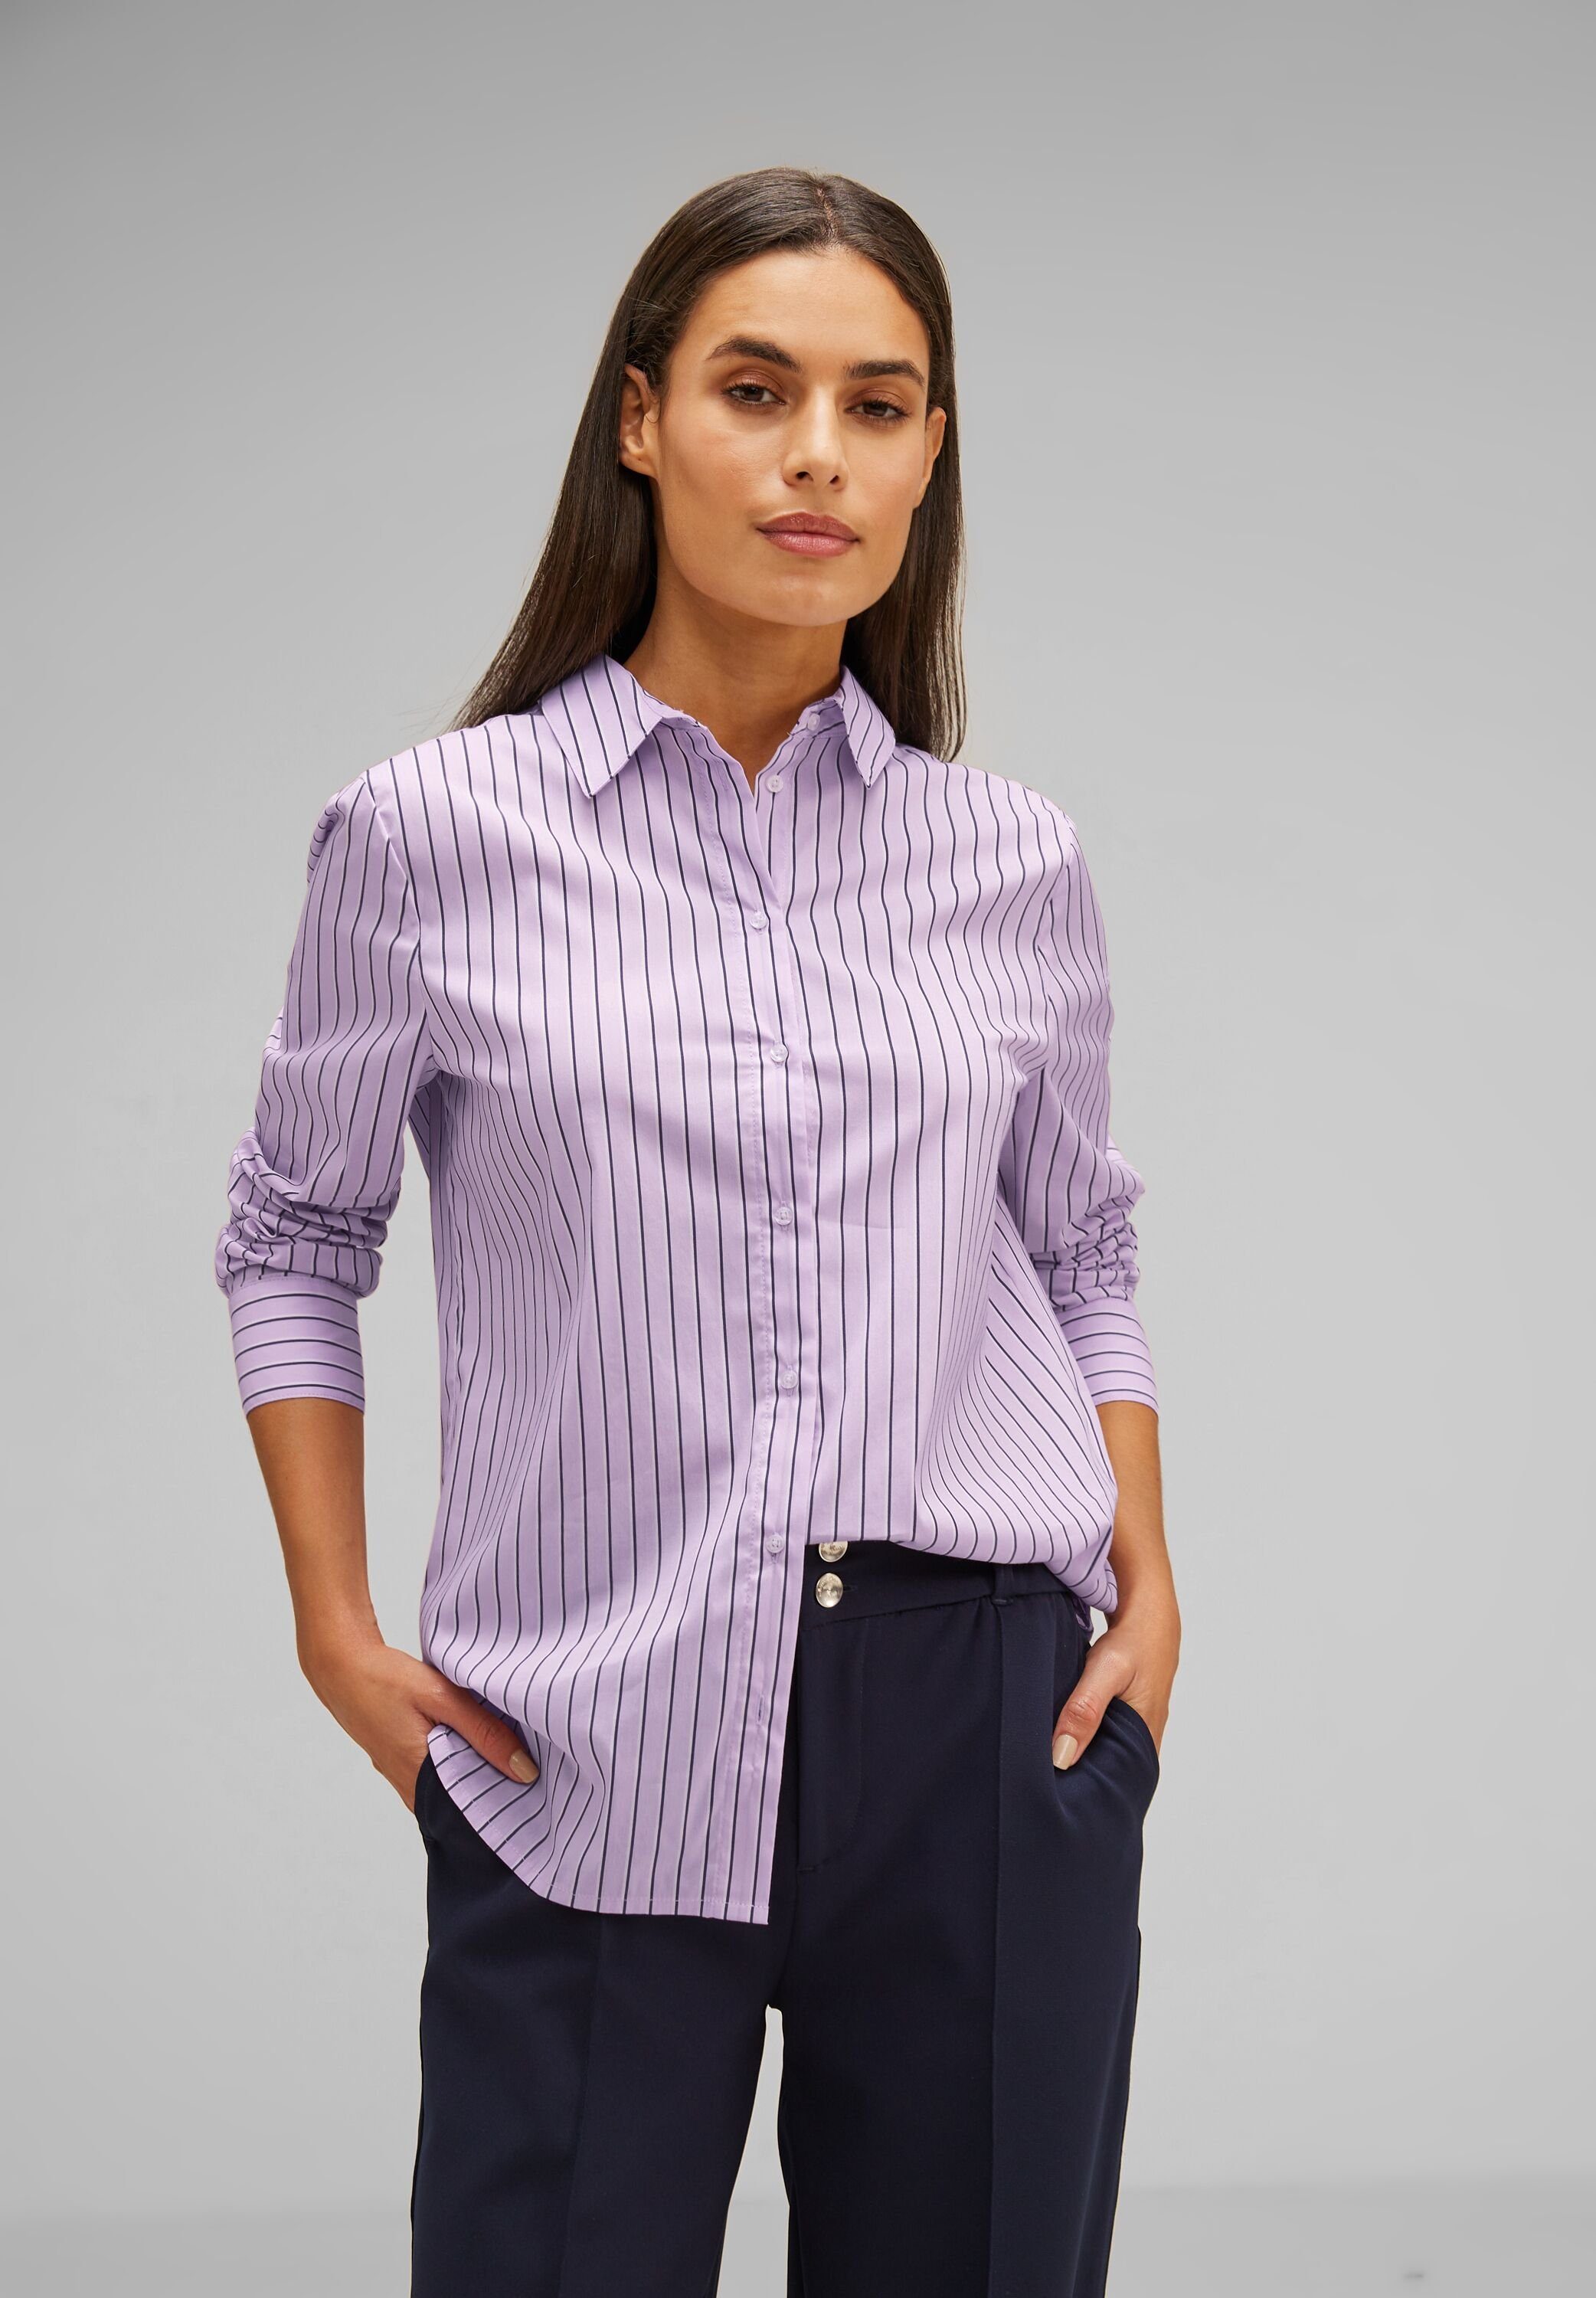 STREET ONE Longbluse Office Streifenbluse LTD QR Striped office blouse Streifenmuster soft pure lilac